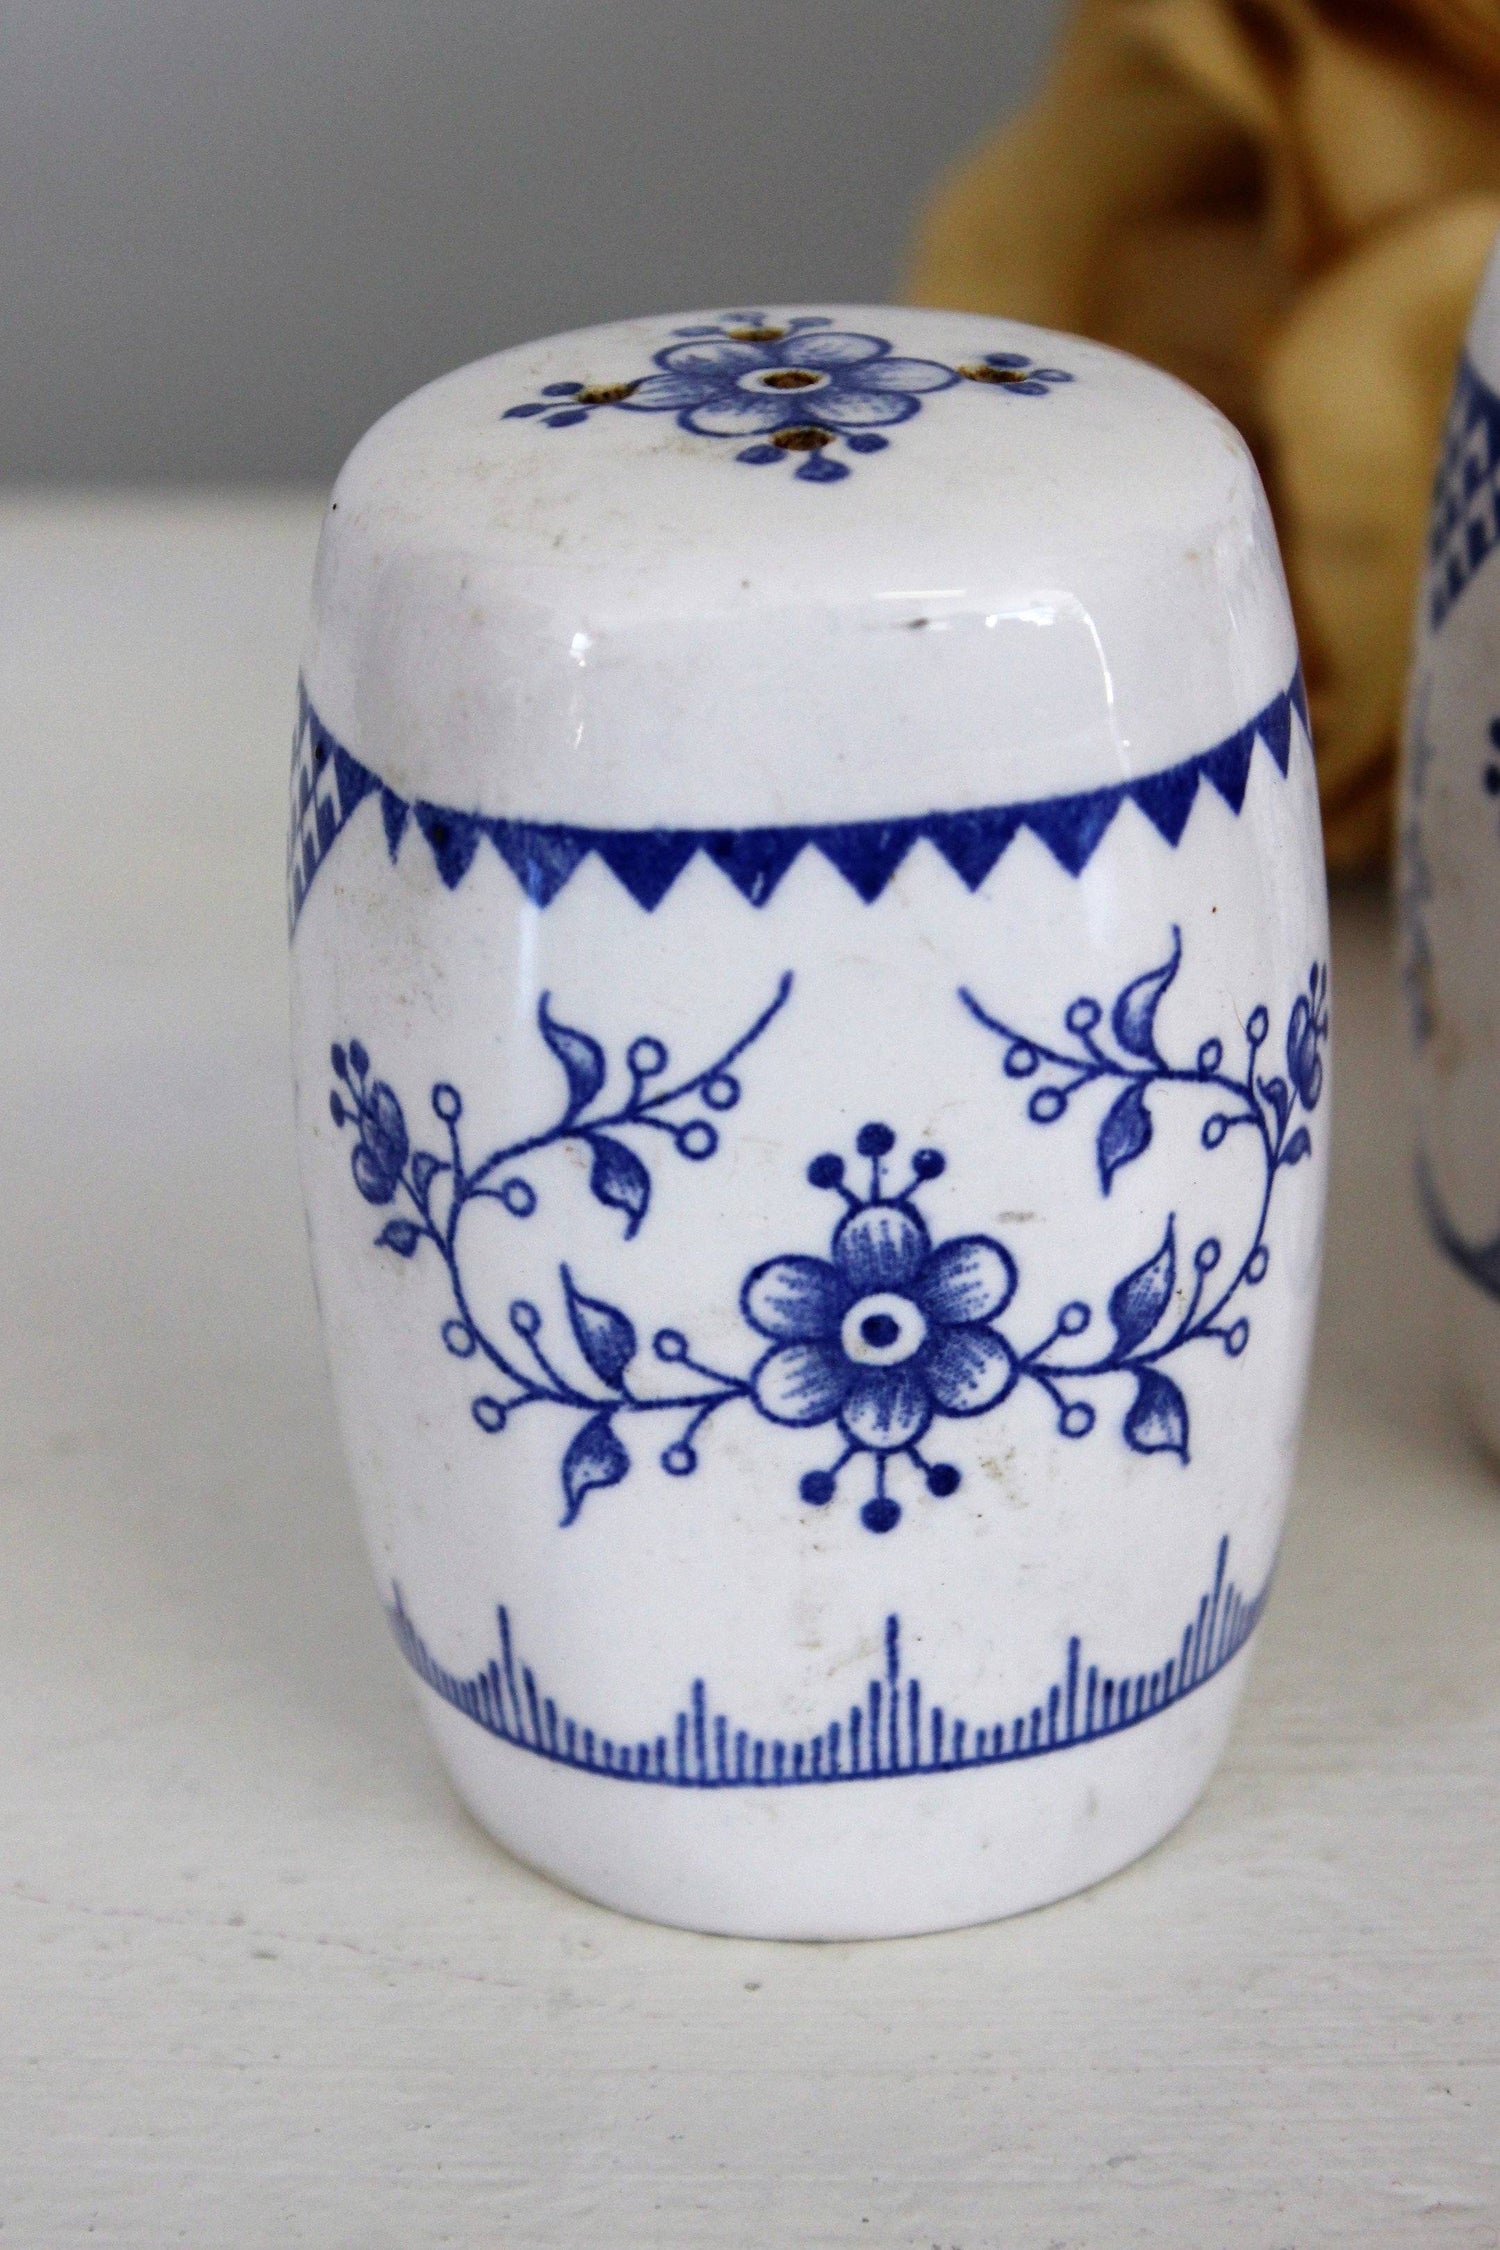 Vintage Blue and White Japanese Salt and Pepper Shaker-Mint Chips Vintage Home Goods-Blue and Whte,Ceramic Floral,Collectible,Delft,Japanese,Japanese Ceramic Delft,Made in Japan,Nippon Salt and Pepper,Pepper Shaker,Salt and pepper Shaker Set,Salt Shaker,Serving Ware,Vintage,Vintage Ceramic,Vintage China,Vintage Kitchenware,Vintage S and P Set,Vintage Tableware